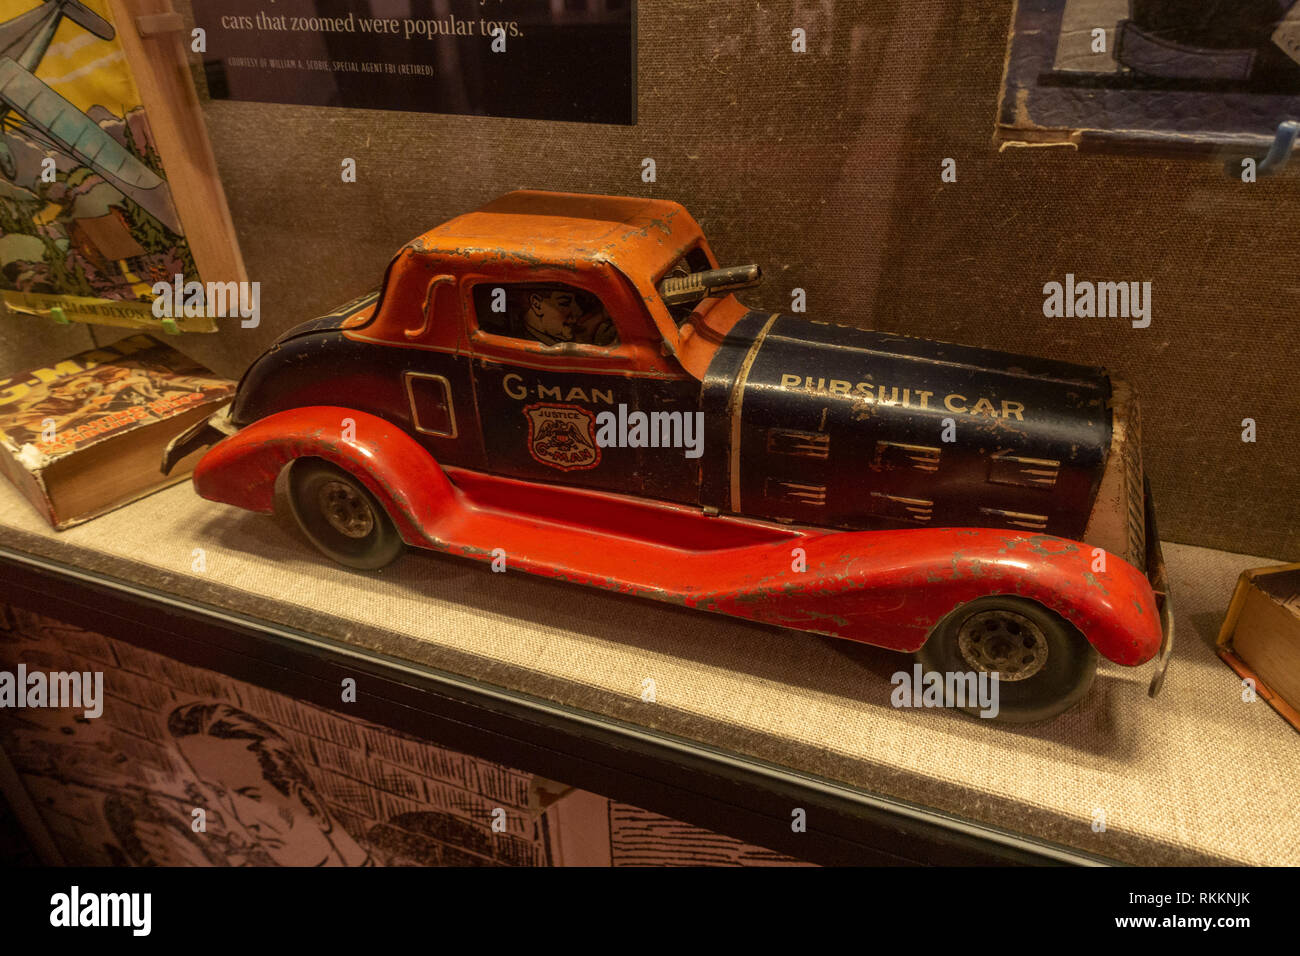 Pursuit car, a G-Men (Government Agents) and gangster related toy, The Mob Museum, Las Vegas (City of Las Vegas), Nevada, United States. Stock Photo